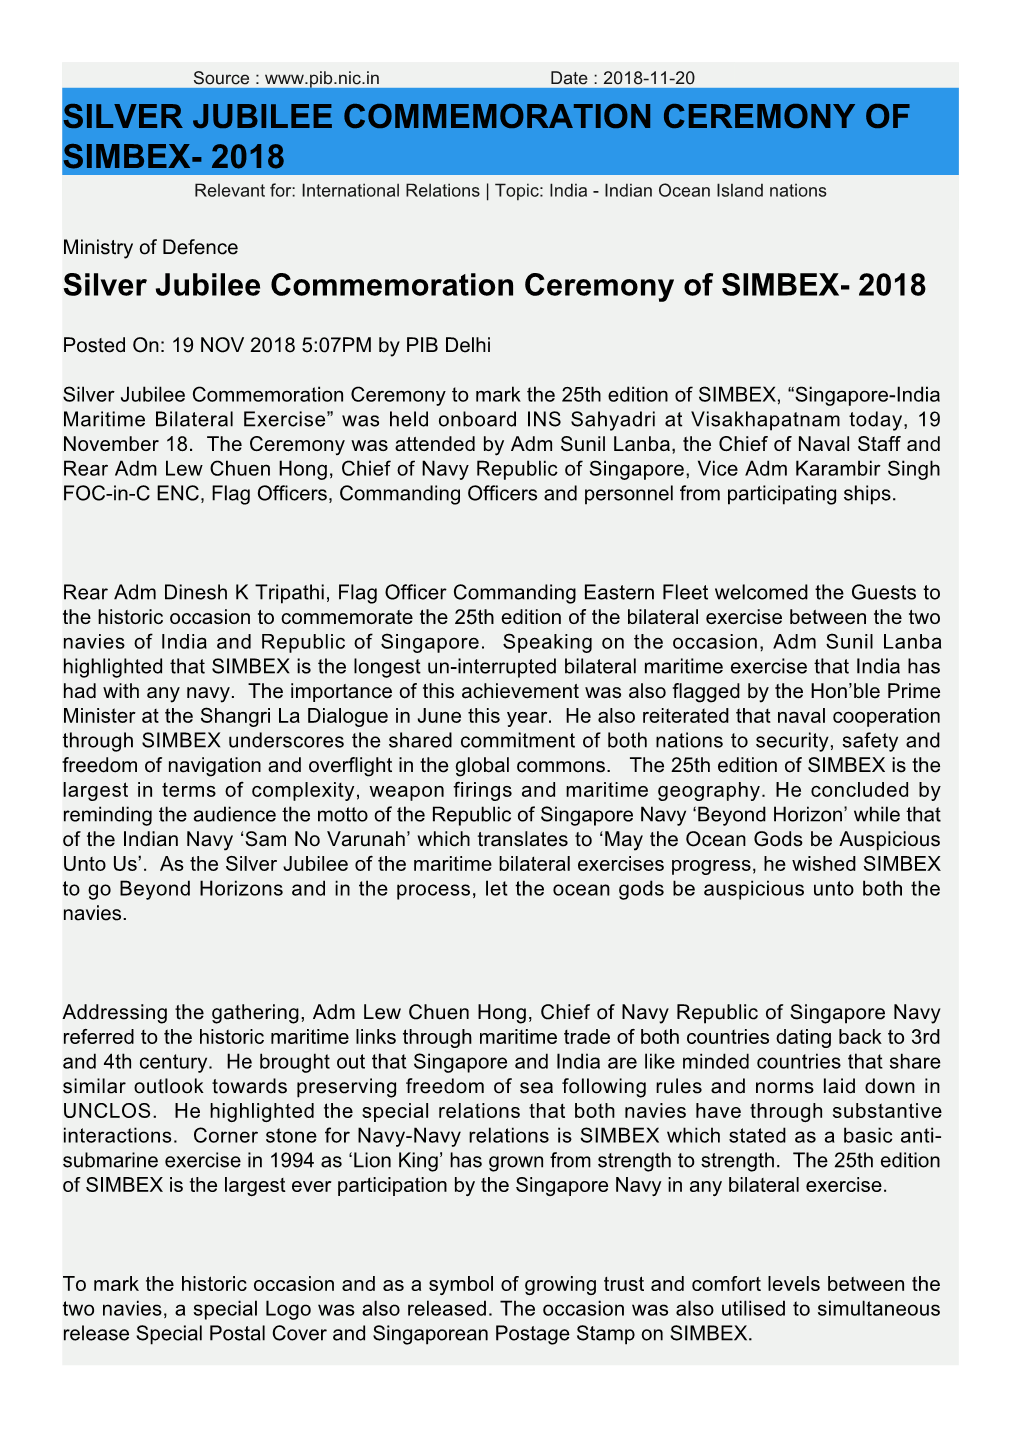 SILVER JUBILEE COMMEMORATION CEREMONY of SIMBEX- 2018 Relevant For: International Relations | Topic: India - Indian Ocean Island Nations